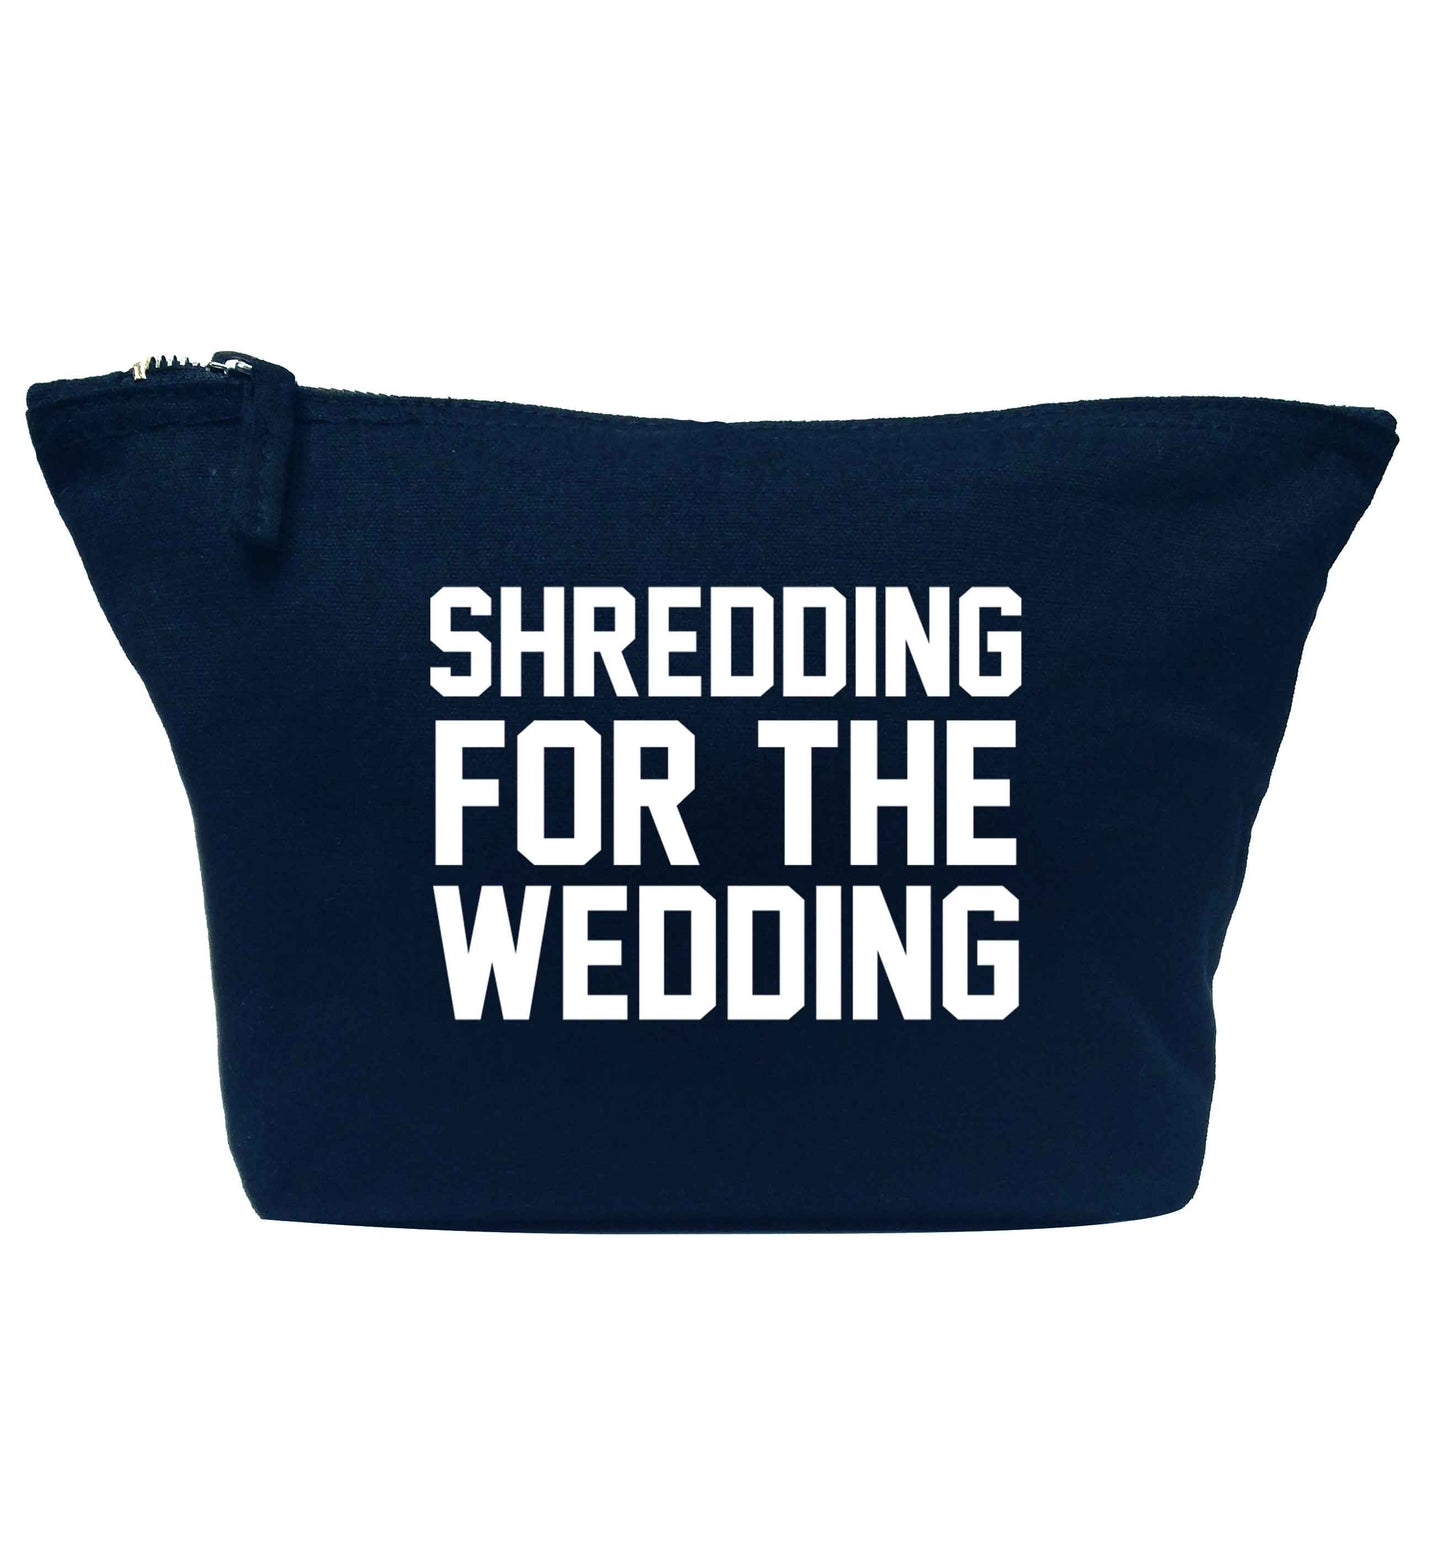 Get motivated and get fit for your big day! Our workout quotes and designs will get you ready to sweat! Perfect for any bride, groom or bridesmaid to be!  navy makeup bag